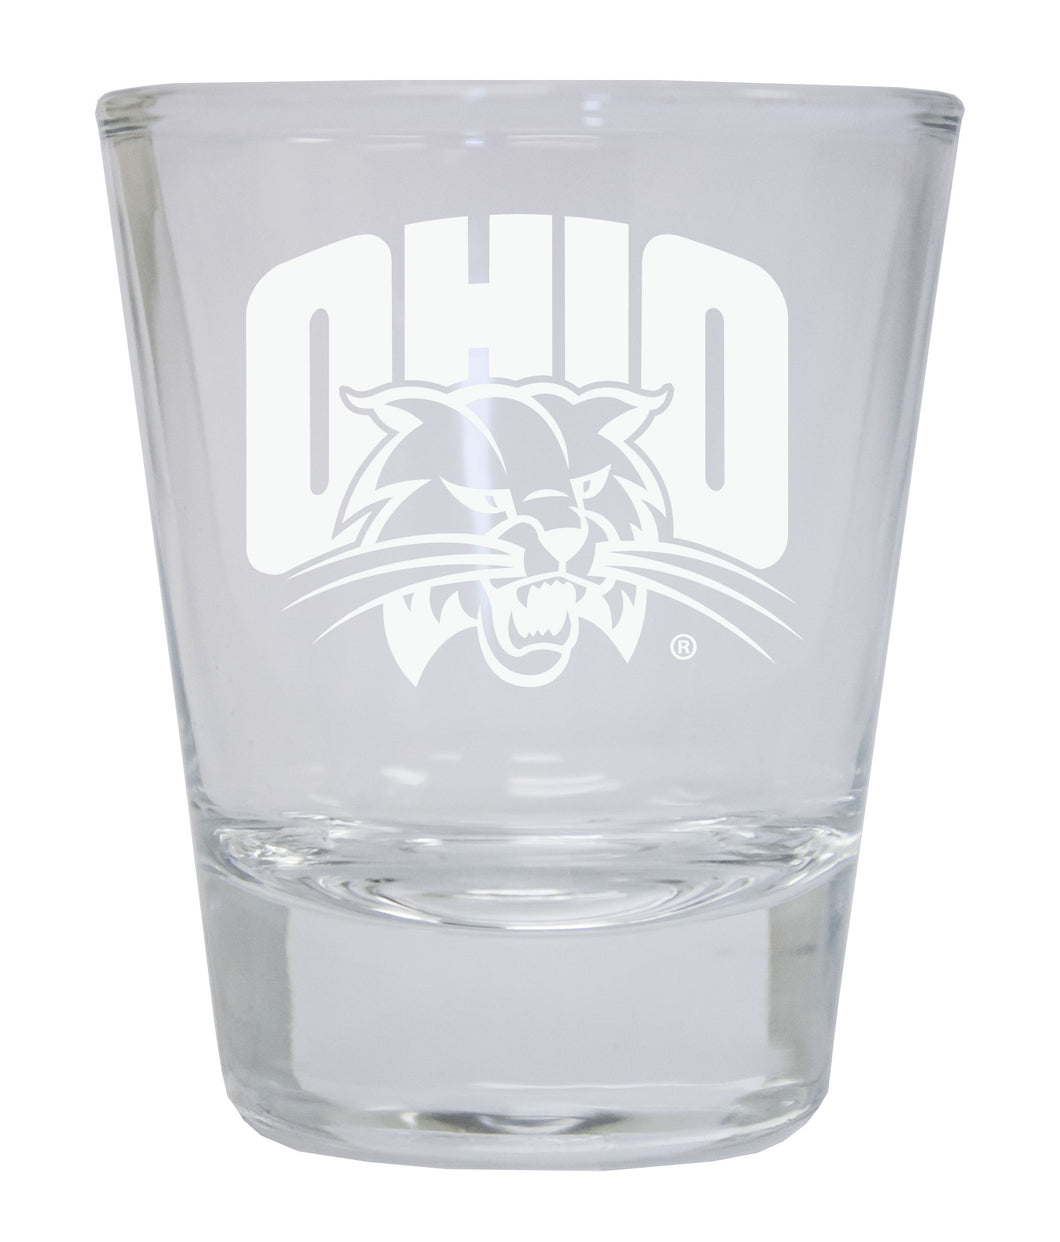 Ohio University Etched Round Shot Glass Officially Licensed Collegiate Product